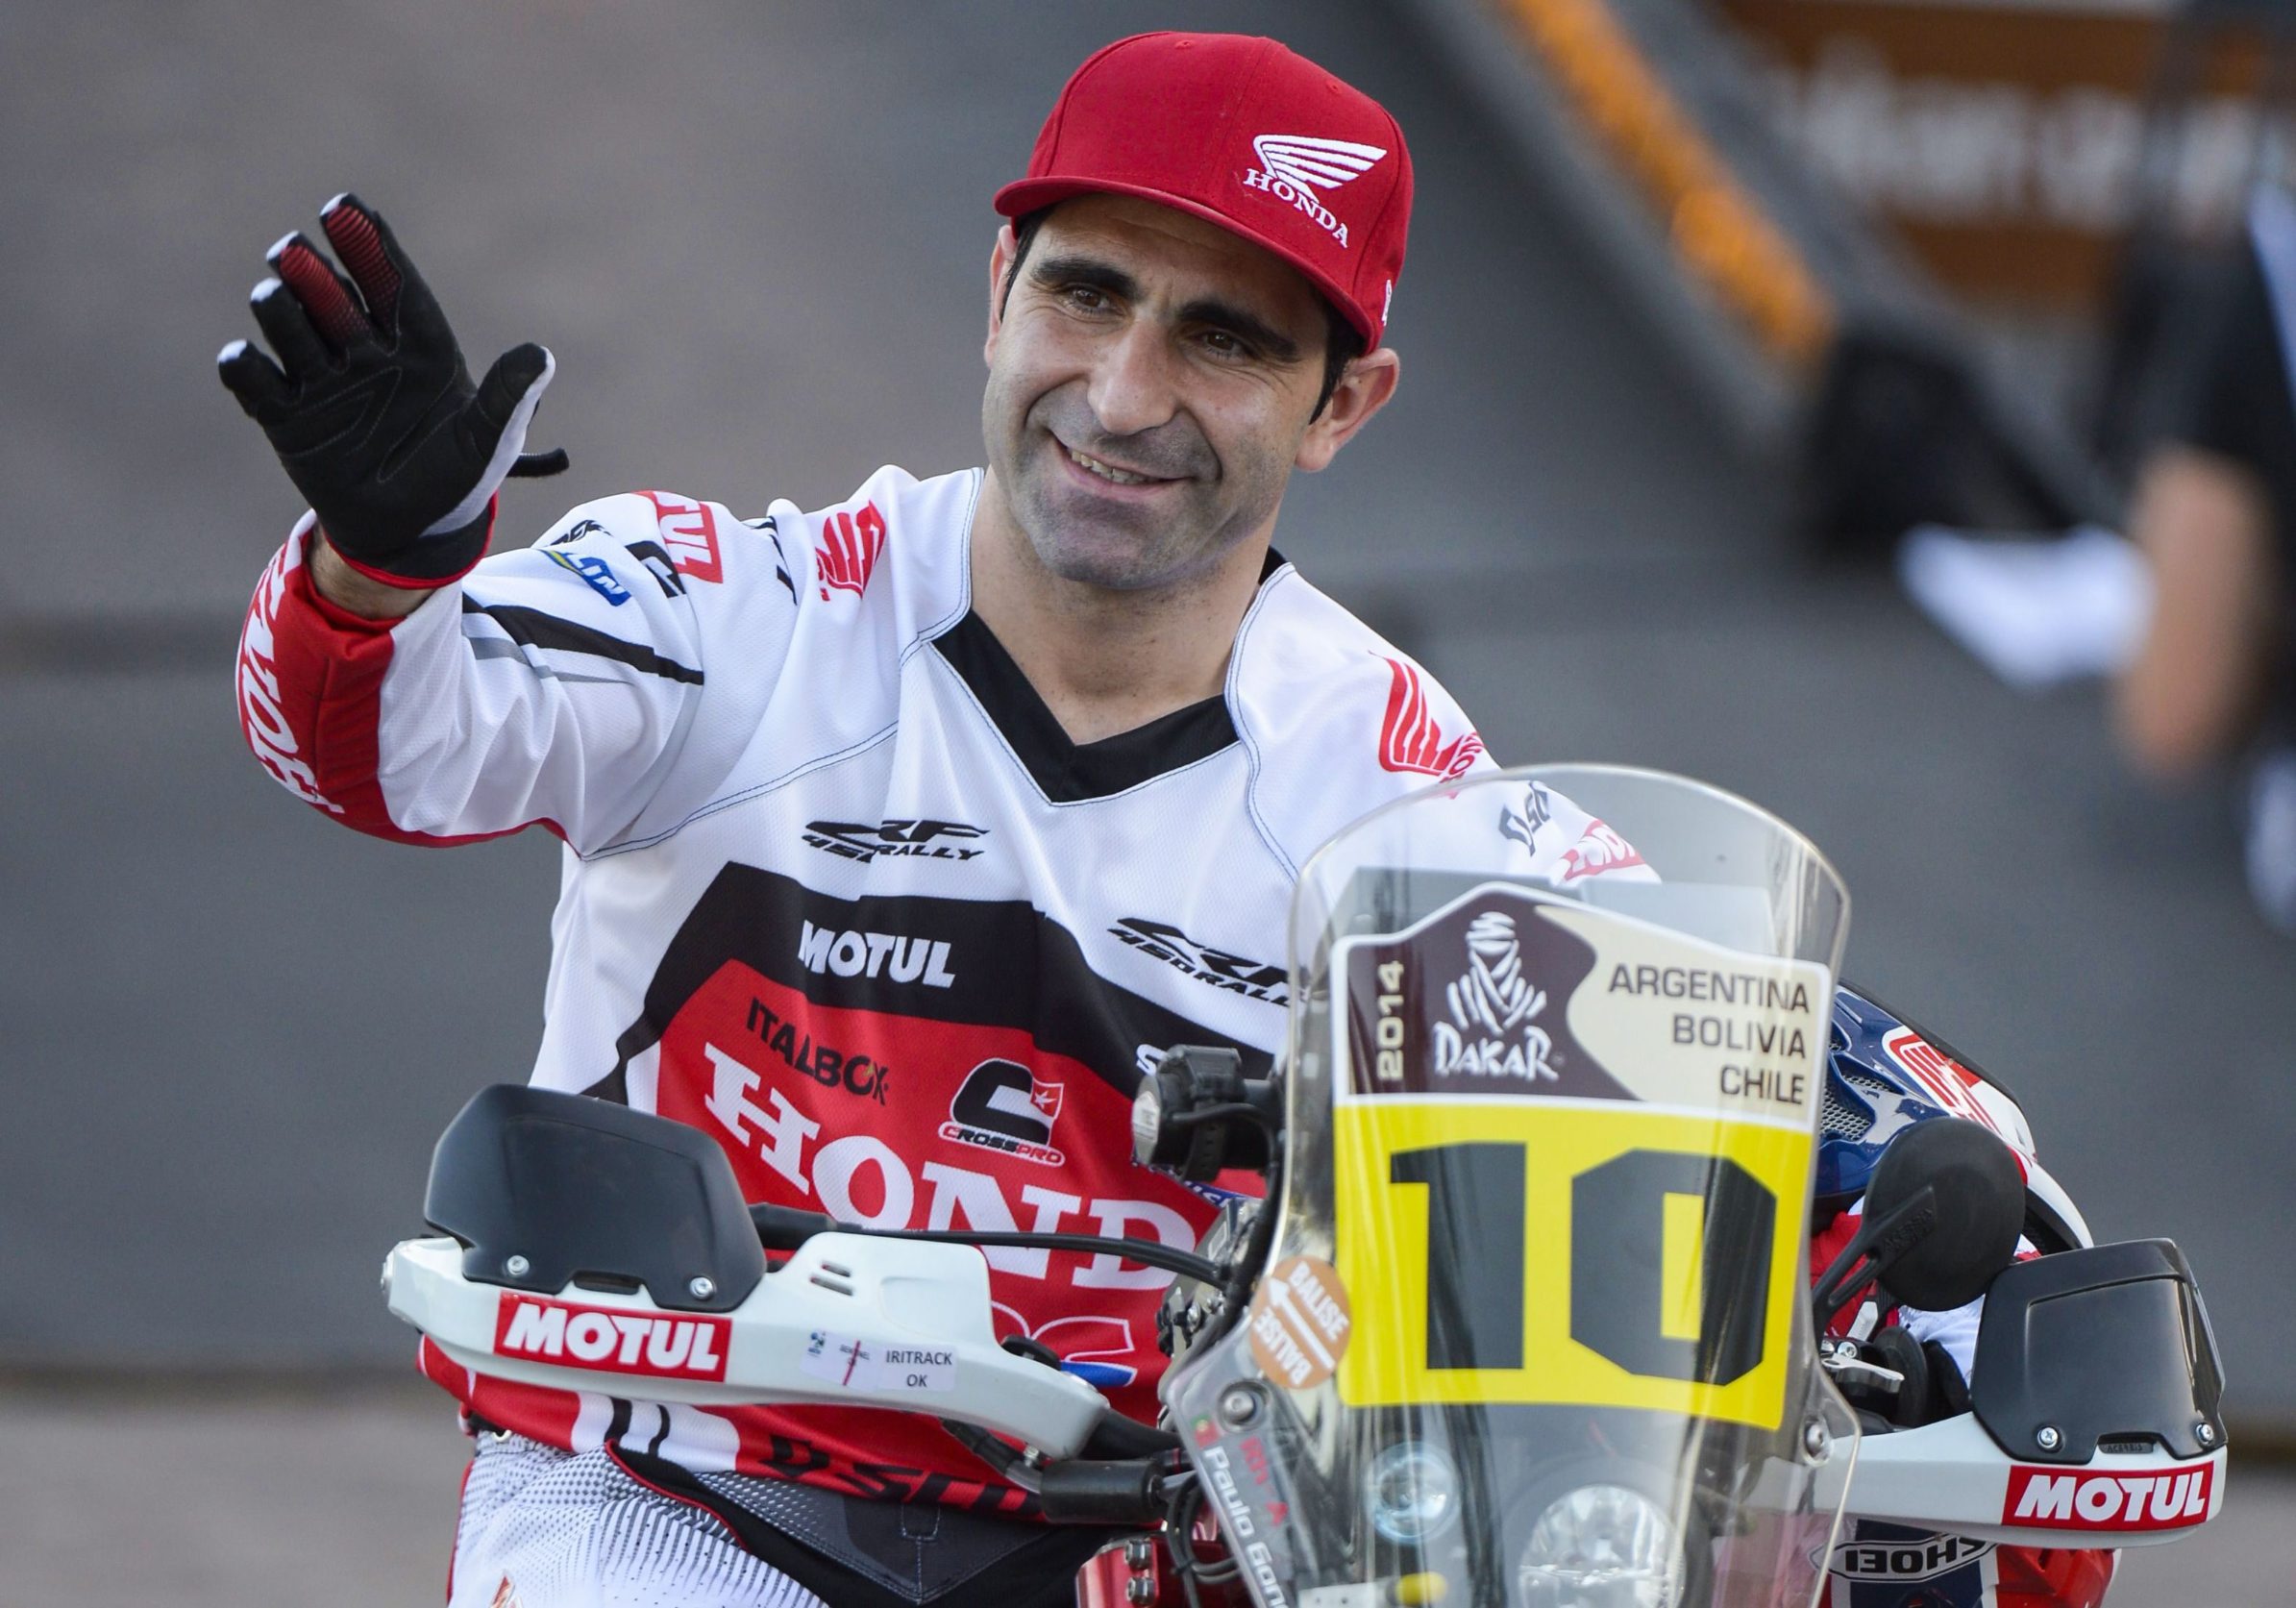 (FILES) In this file photo taken on January 4, 2014 Portuguese motorbike rider Paulo Goncalves during the symbolic start of the 2014 Dakar Rally in Rosario some 350 Km north of Buenos Aires. - Paulo Goncalves has died on January 12, 2020 after a crash during the Dakar Rally seventh stage, organisers announced. The 40-year-old suffered the fatal accident after 276 kilometres of the day's ride. Unconscious when medics arrived he was helicoptered to hospital where his death was confirmed. He was competing in his 13th edition of the Dakar and was placed 10th in the standings. (Photo by Juan MABROMATA / AFP)